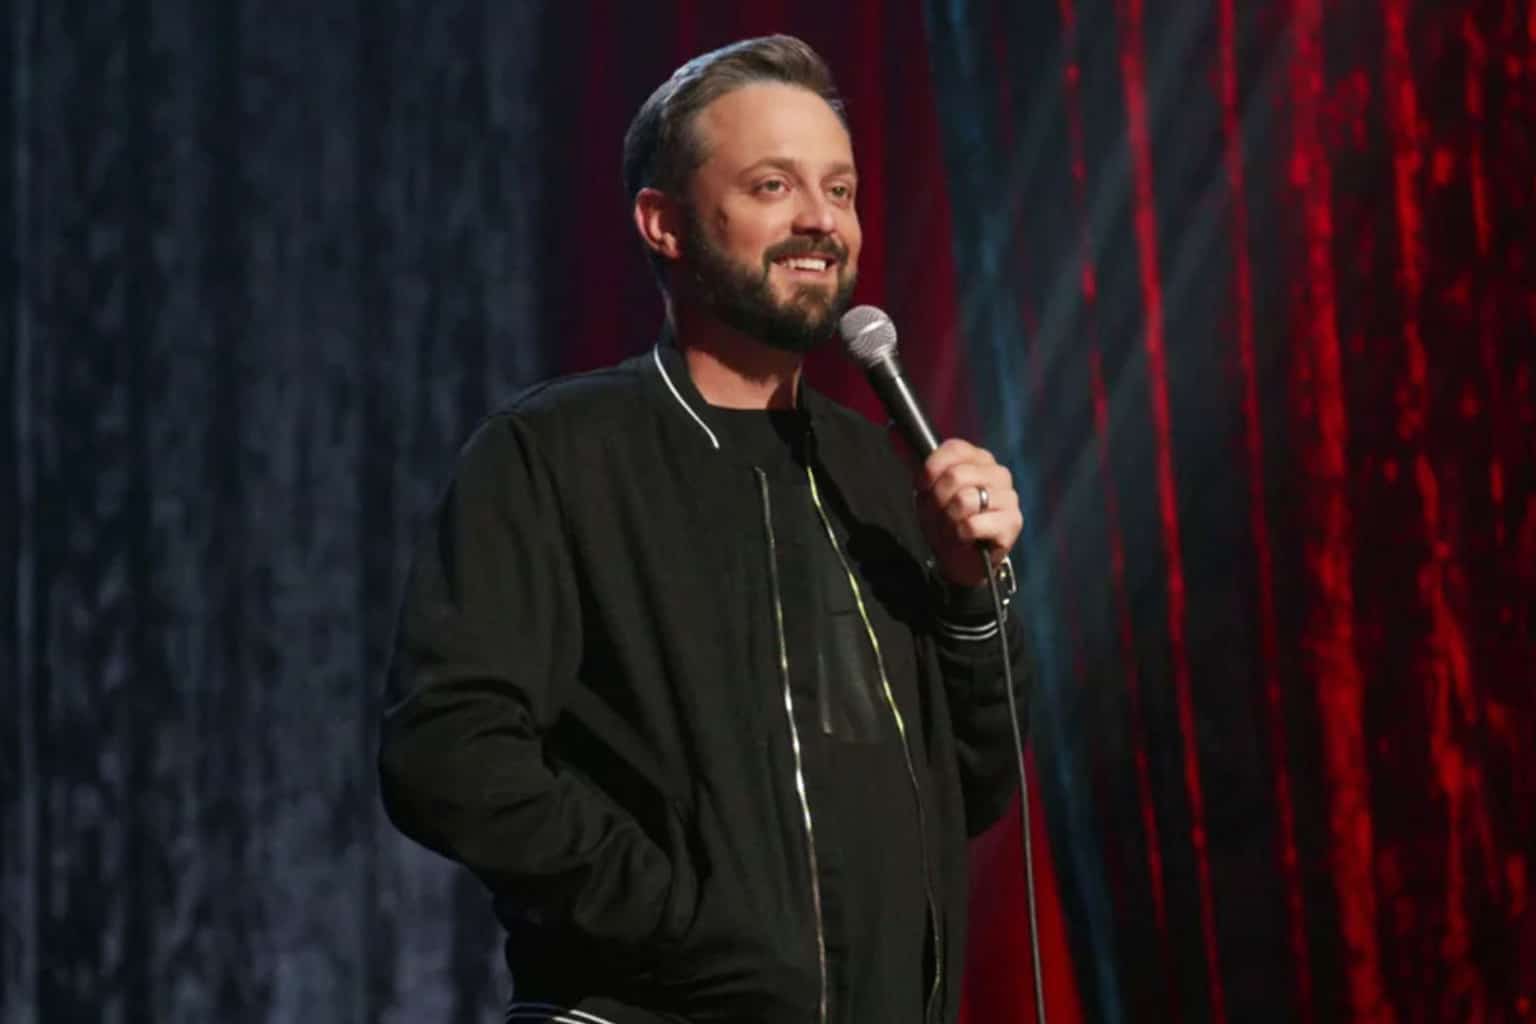 Nate Bargatze on Faith, Comedy and His New Netflix Special RELEVANT